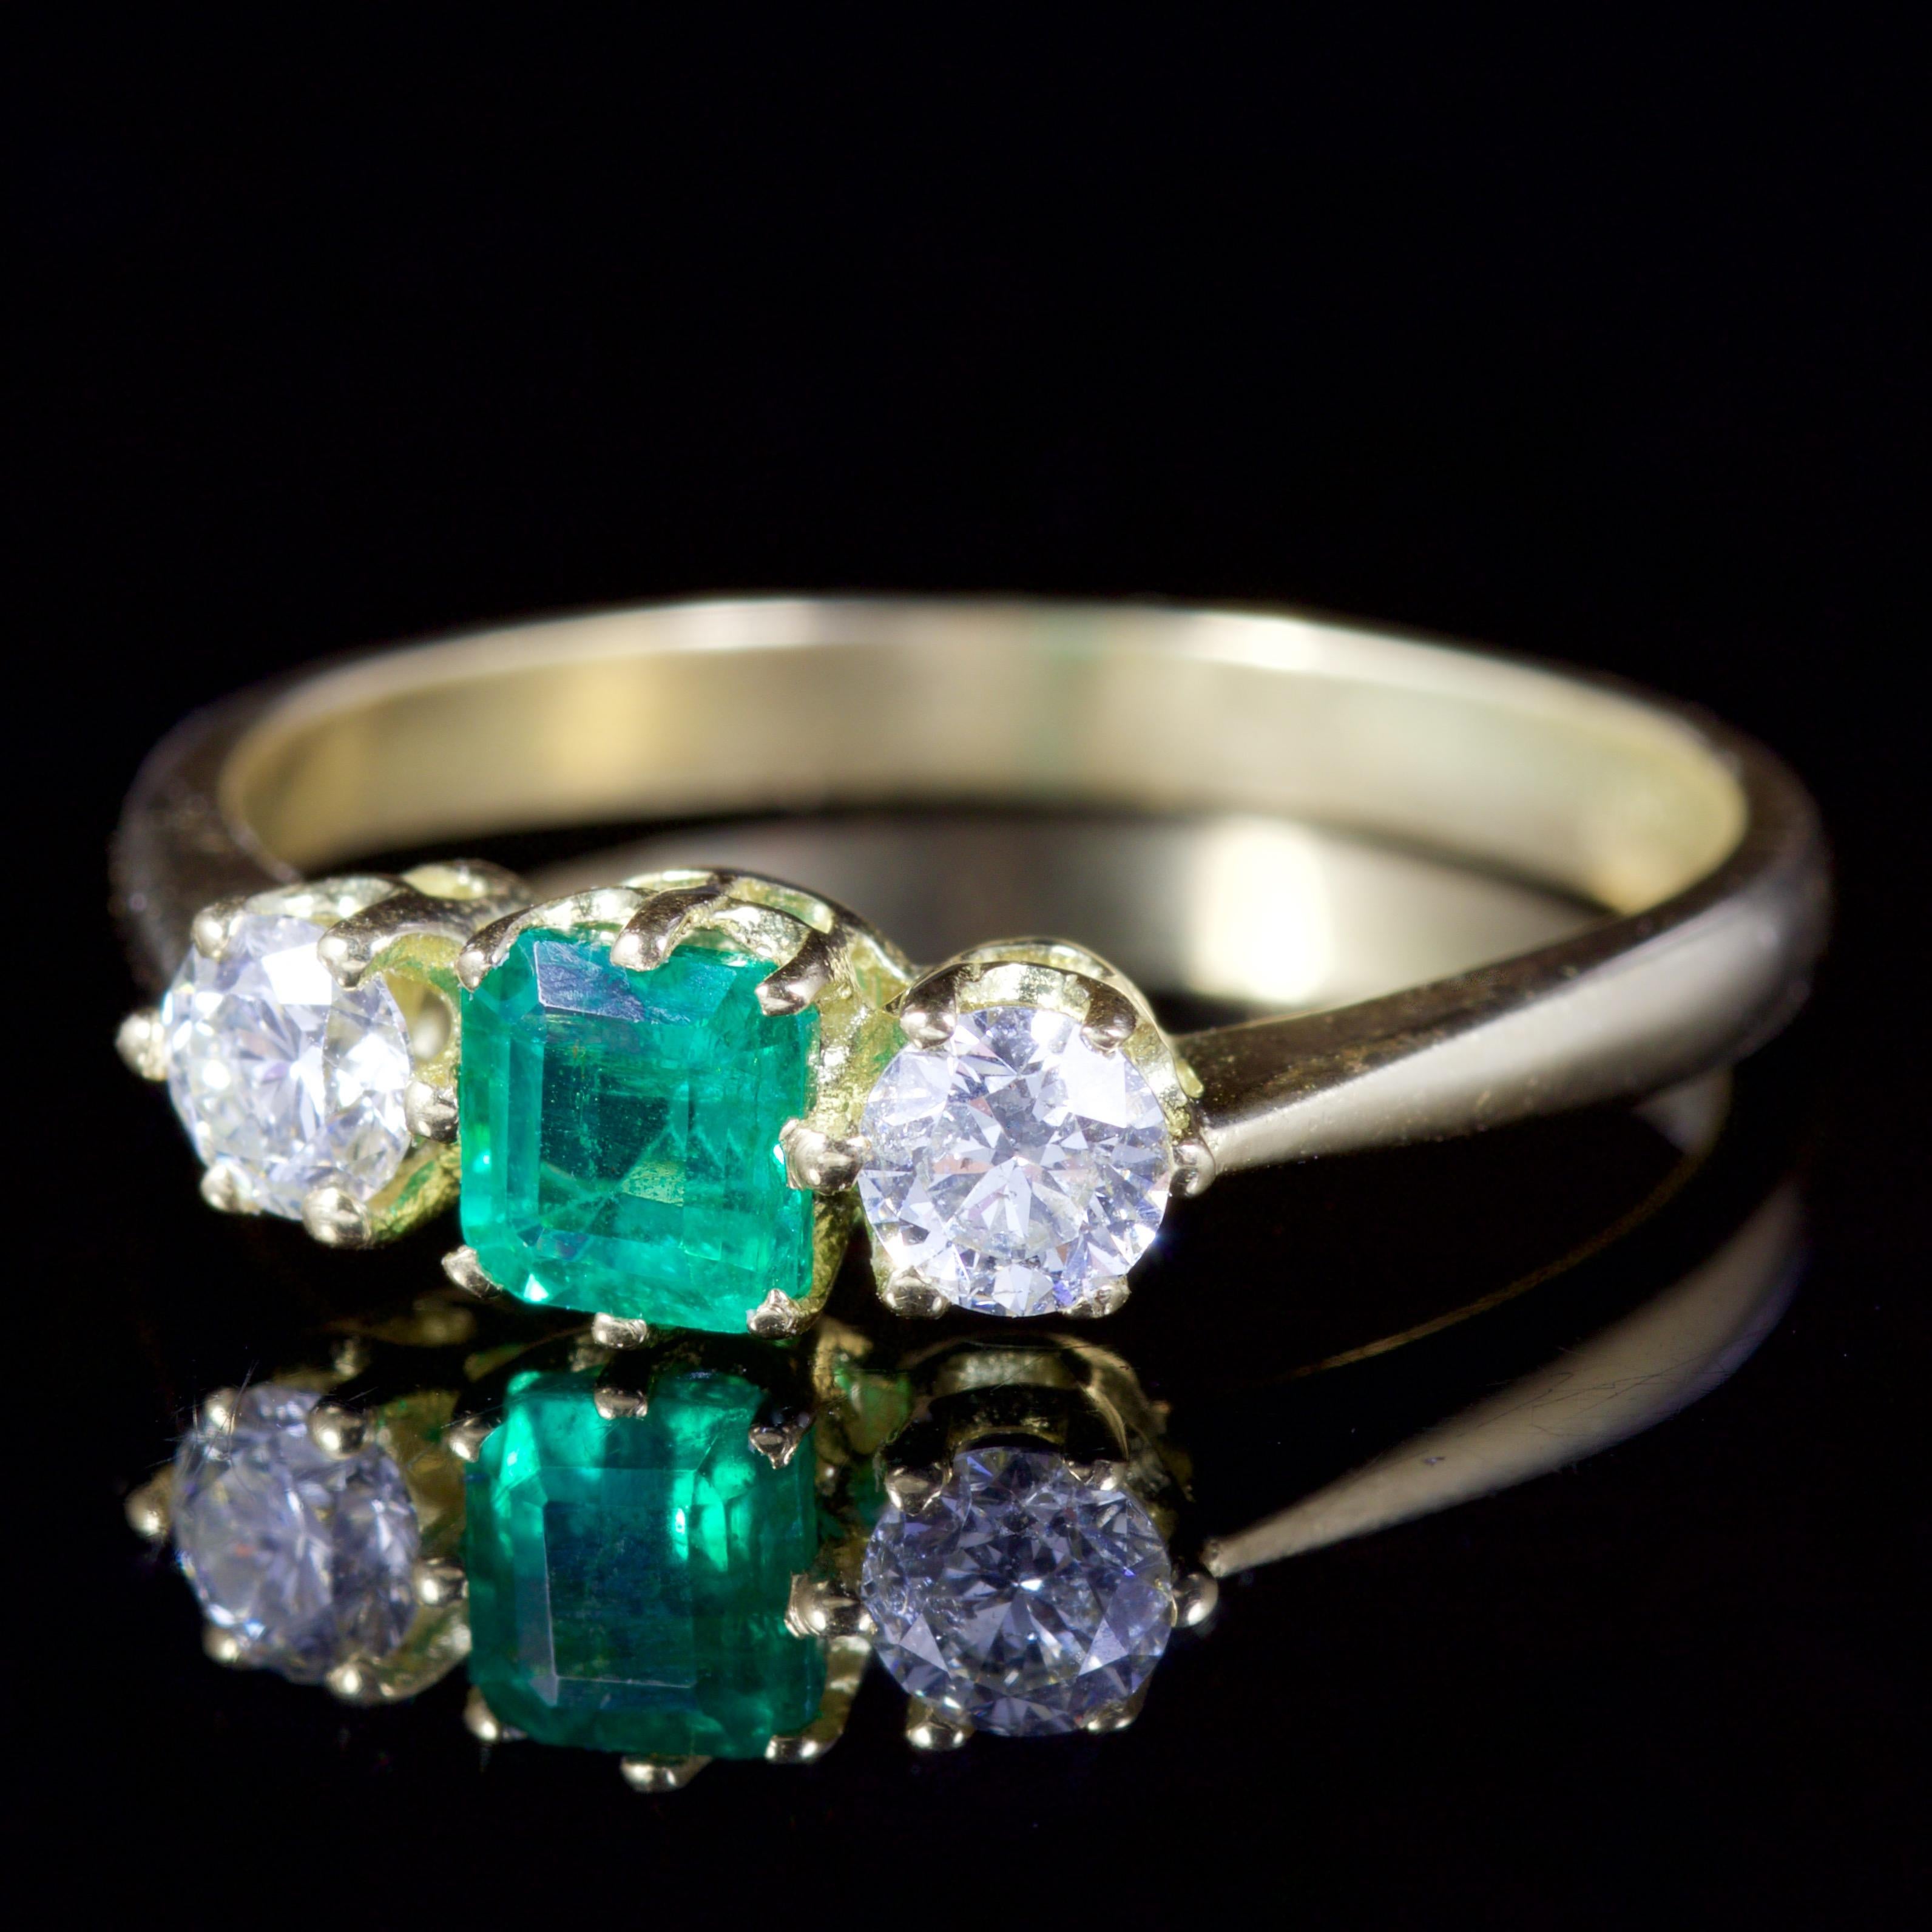 This Victorian Emerald and Diamond trilogy ring is set in 18ct Gold, Circa 1900.

The beautiful ring is adorned in a 0.35ct square cut Emerald, with 2 glistening bright white Diamonds.

The trilogy of gemstones compliment each other